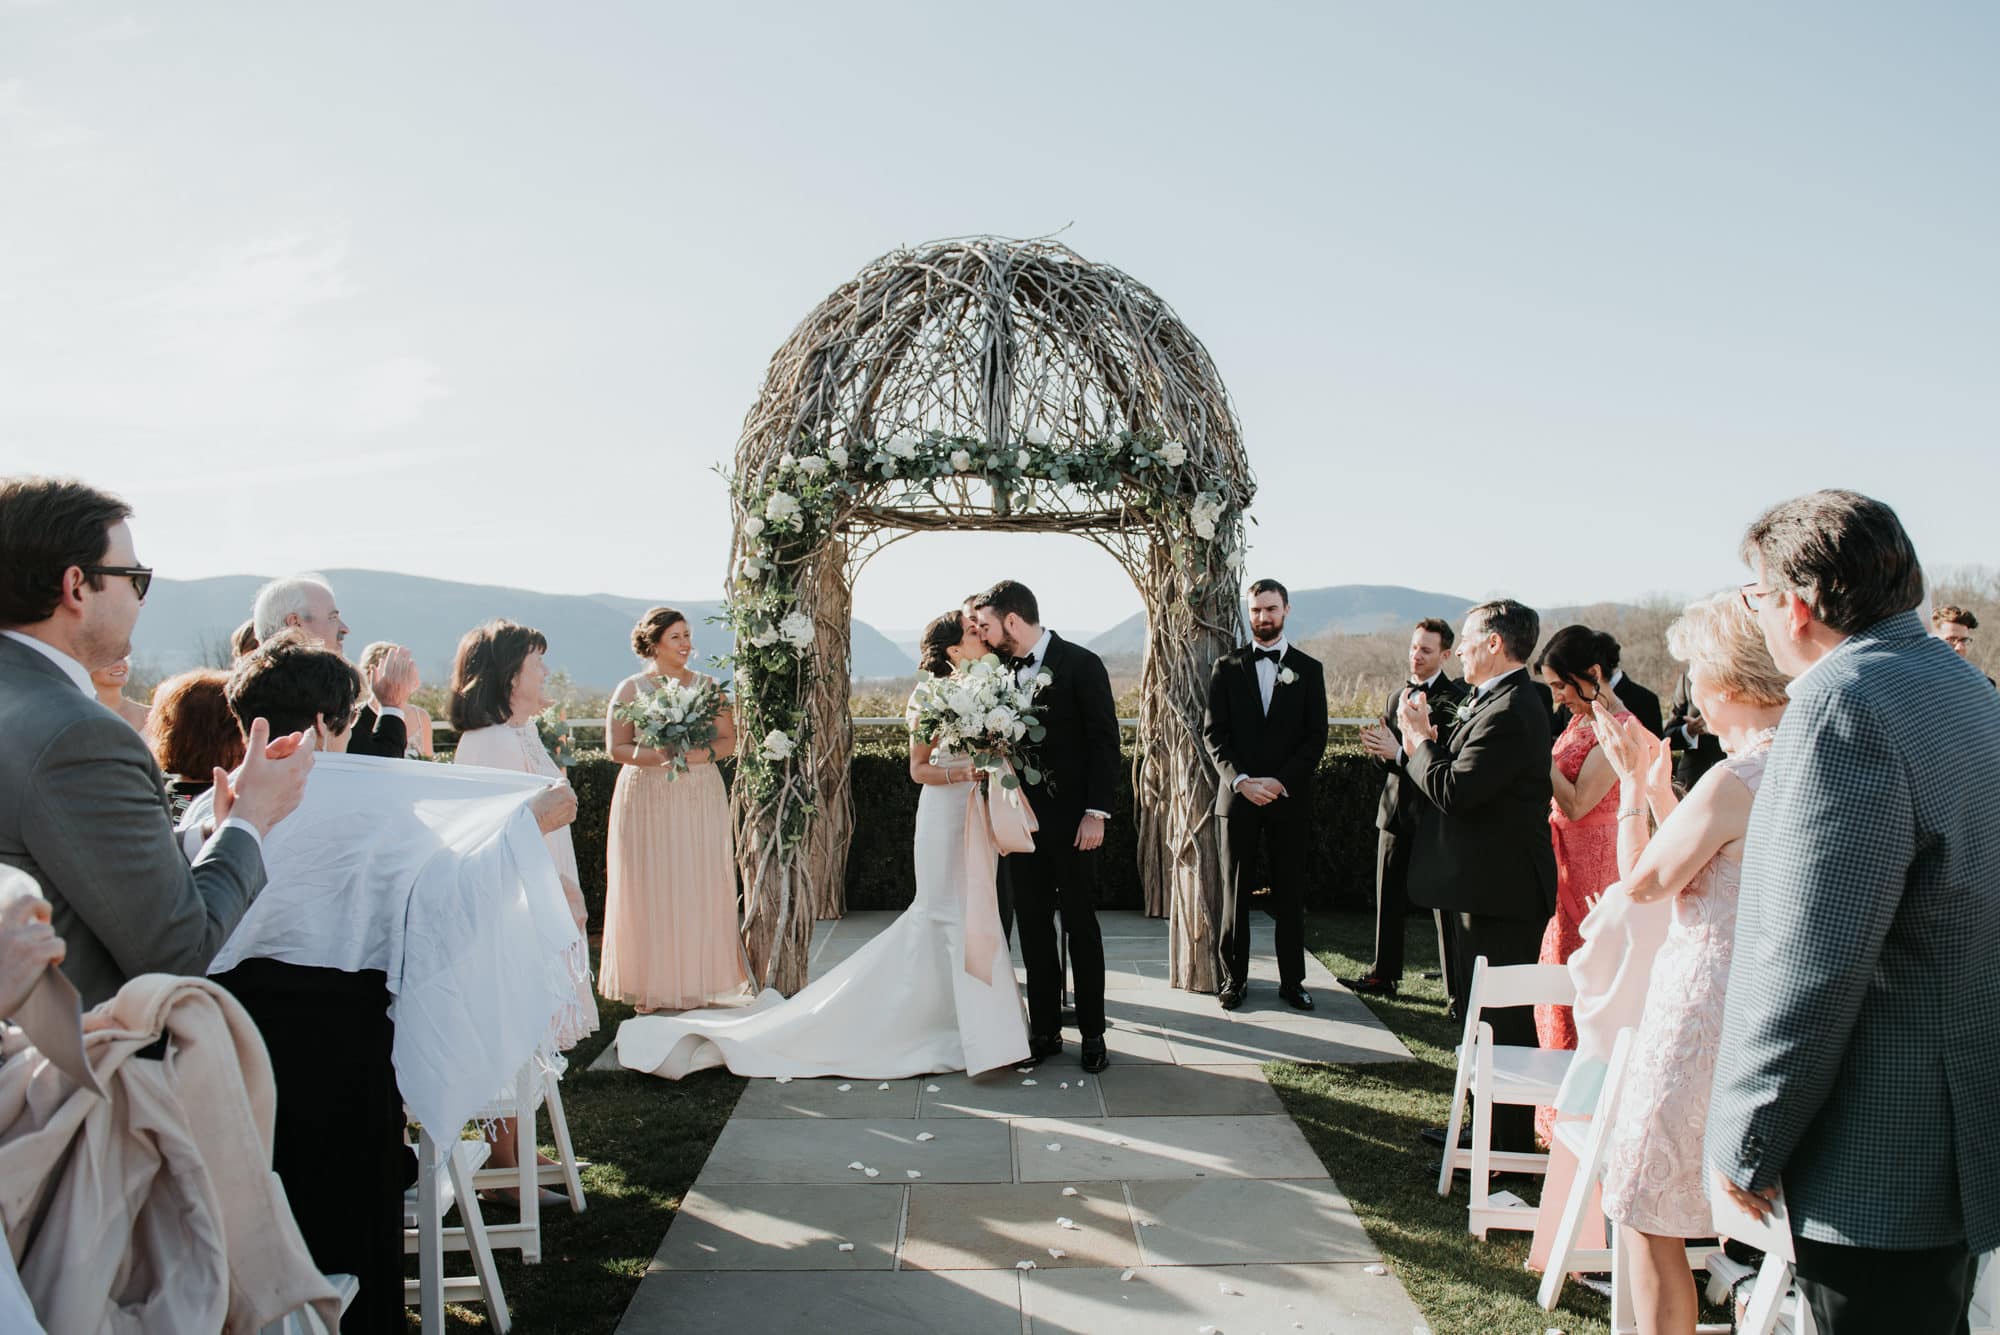 Wedding Ceremony at The Garrison, Bride in Marchesa Gown, Groom in Bonobos Tux